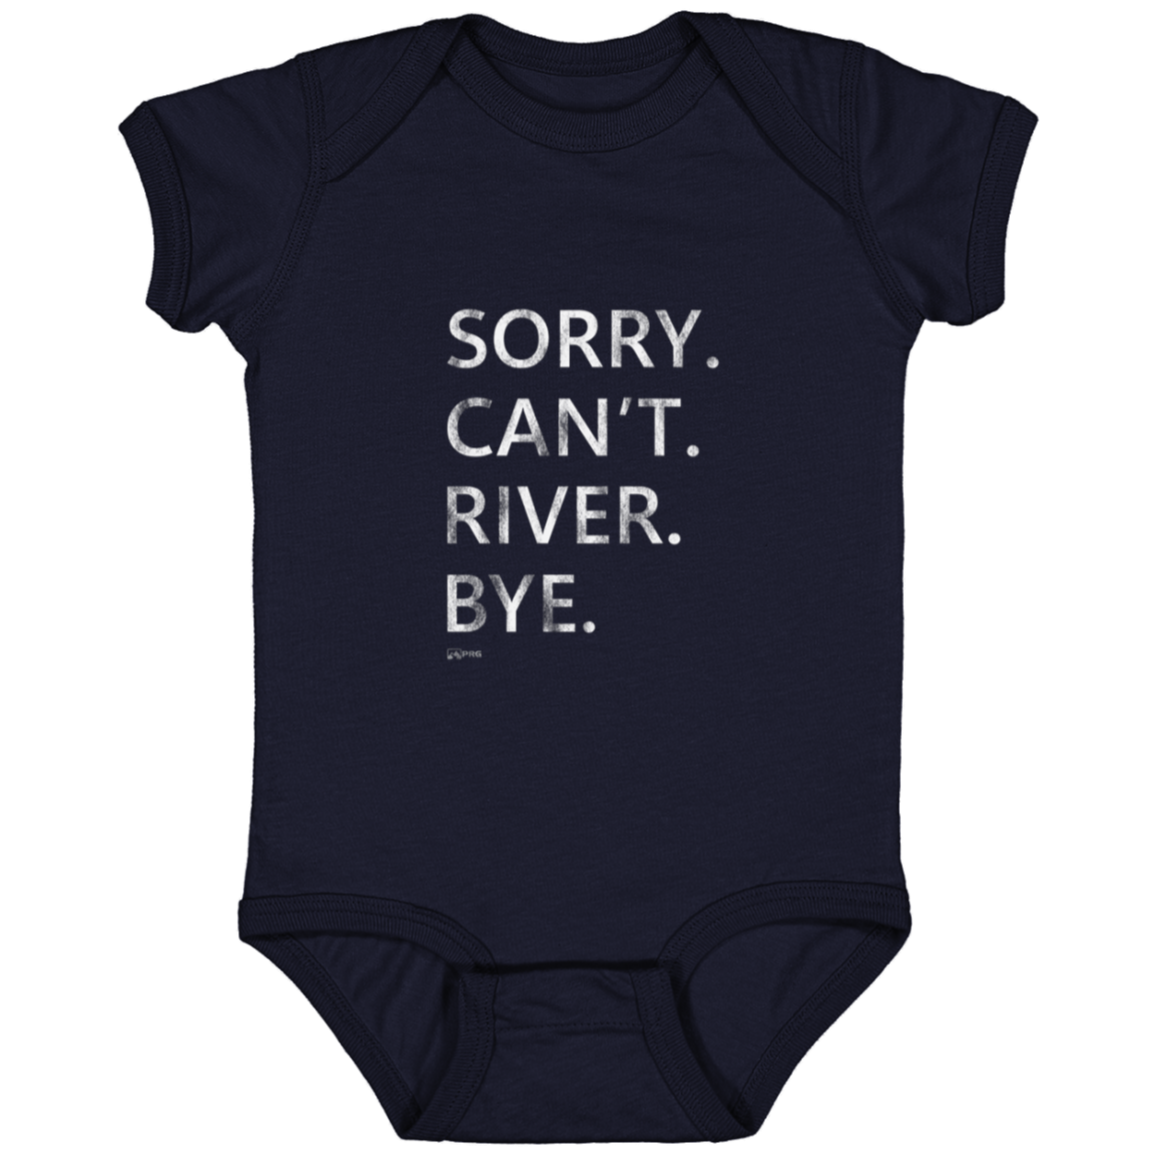 Sorry. Can't. River. Bye. - Infant Onesie